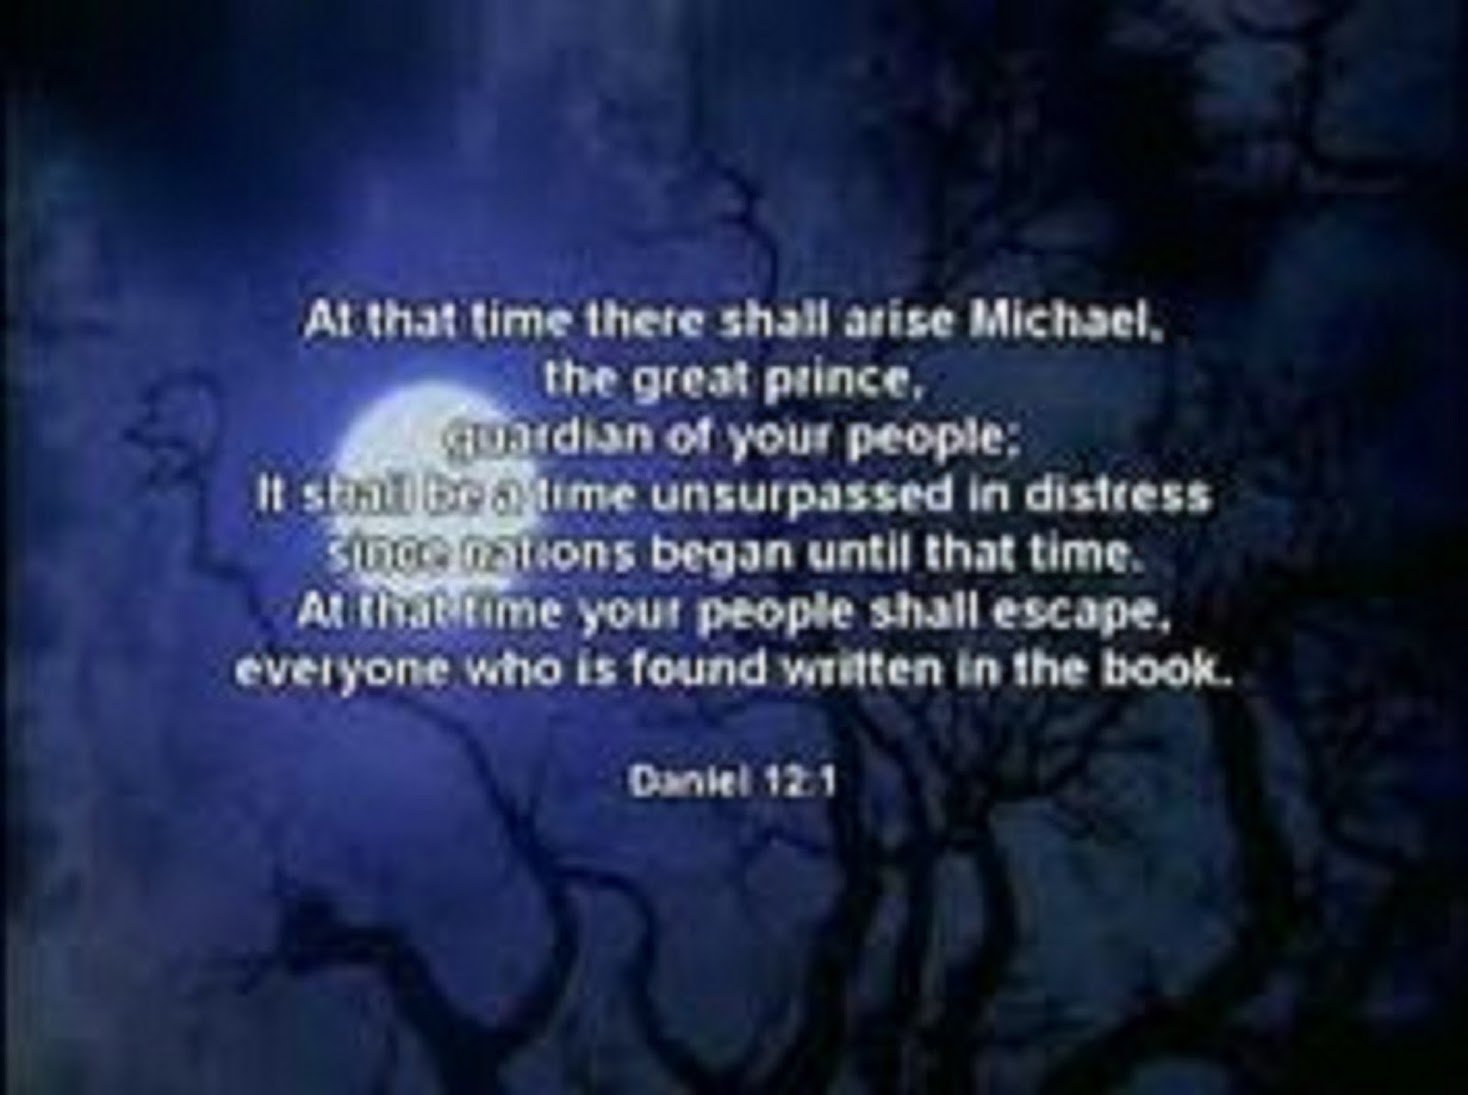 DANIEL 12:1 -AT THAT TIME SHALL ARISE MICHAEL THE GREAT PRINCE